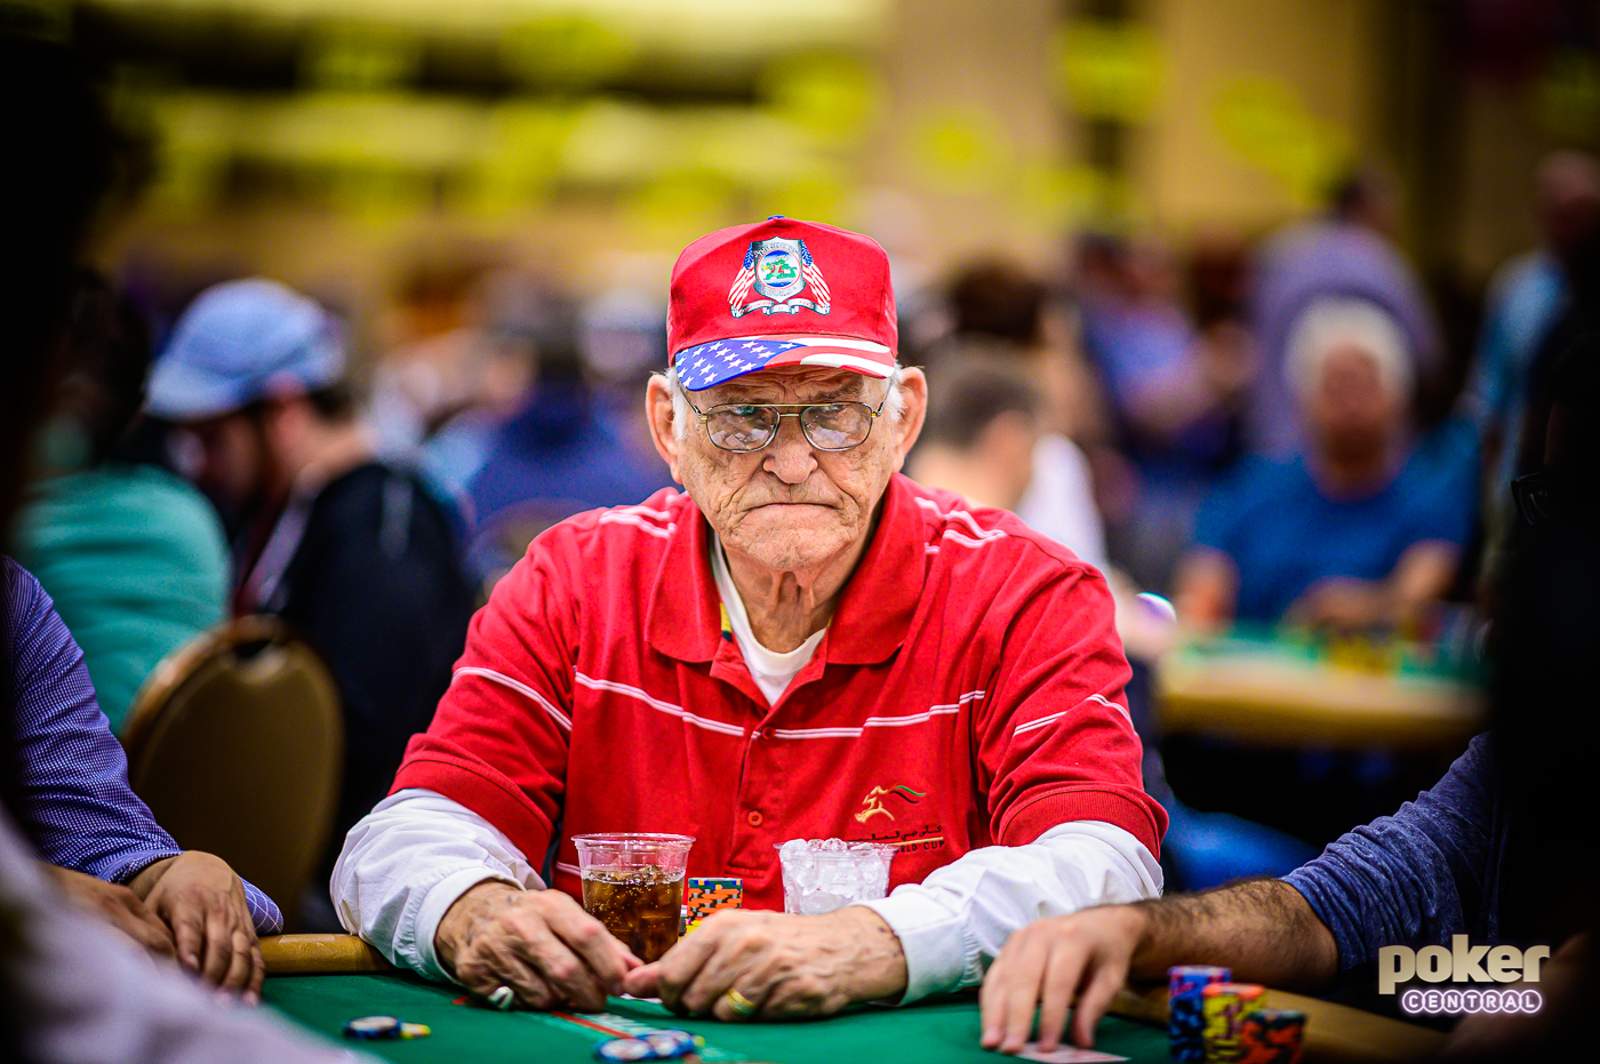 WSOP Main Event Day 3: Champions Fall Outside the Money While Prebben Stokkan Rises from a Single Chip to Lead the Main Event